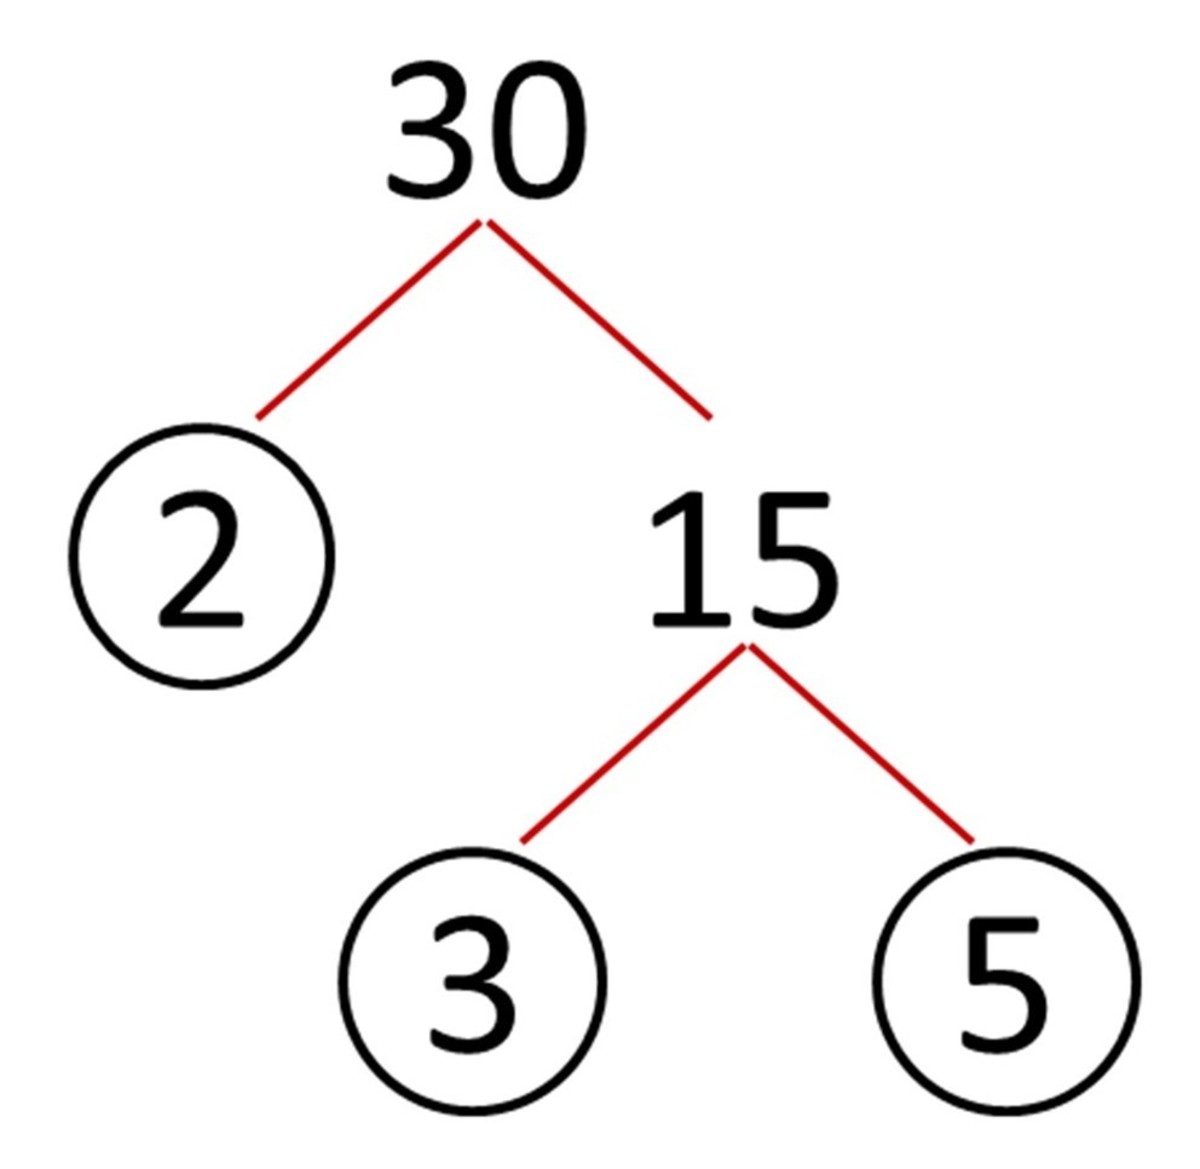 A factor tree of the number 30.